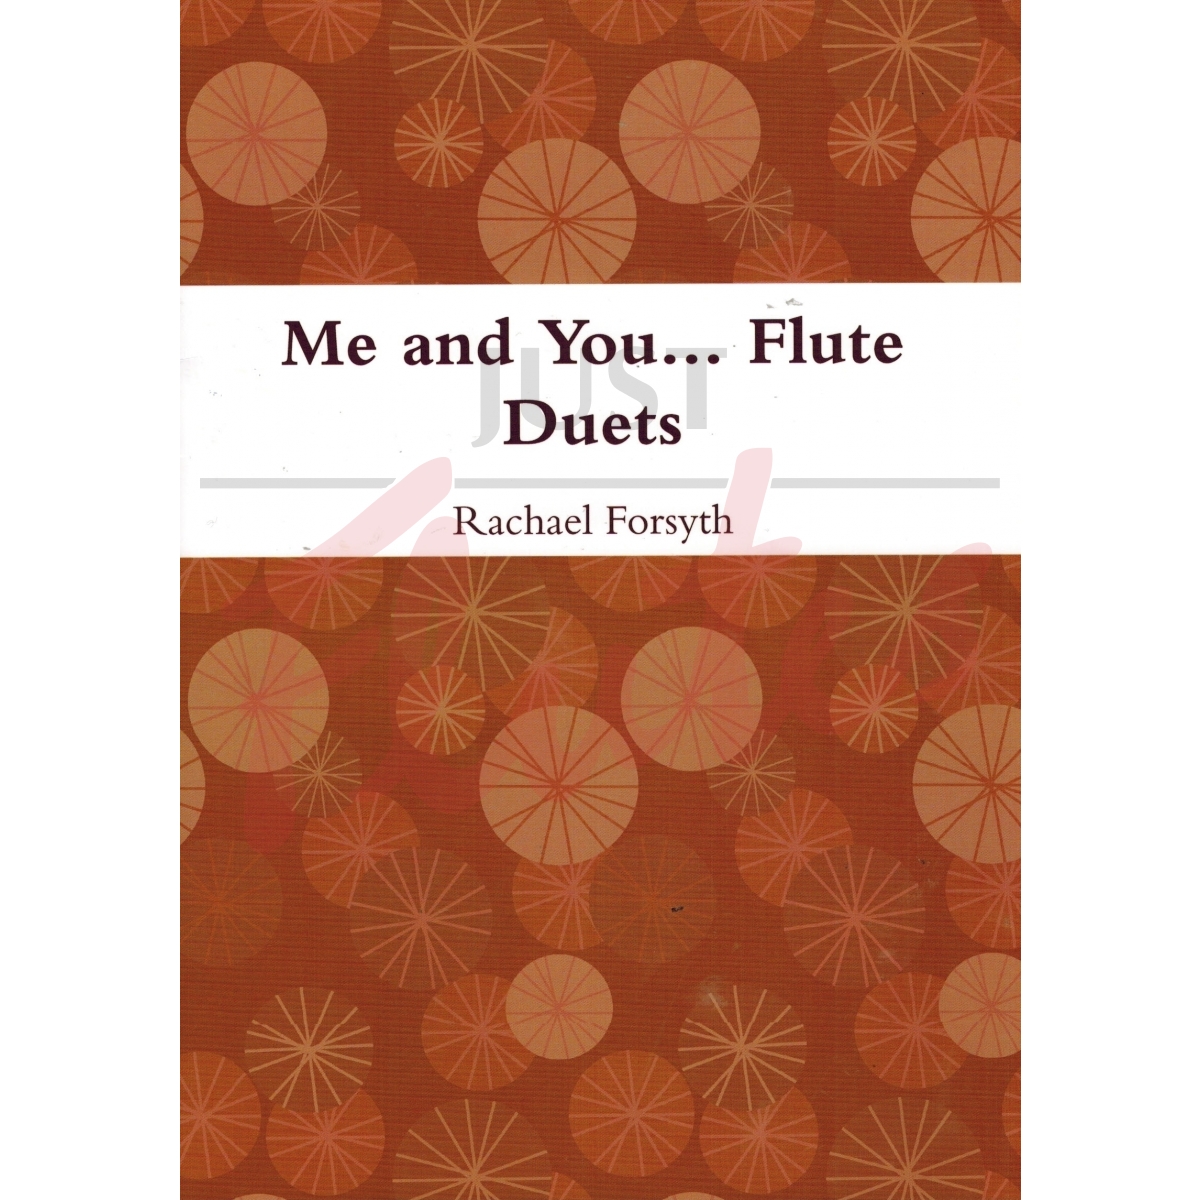 Me and You..... Flute Duets